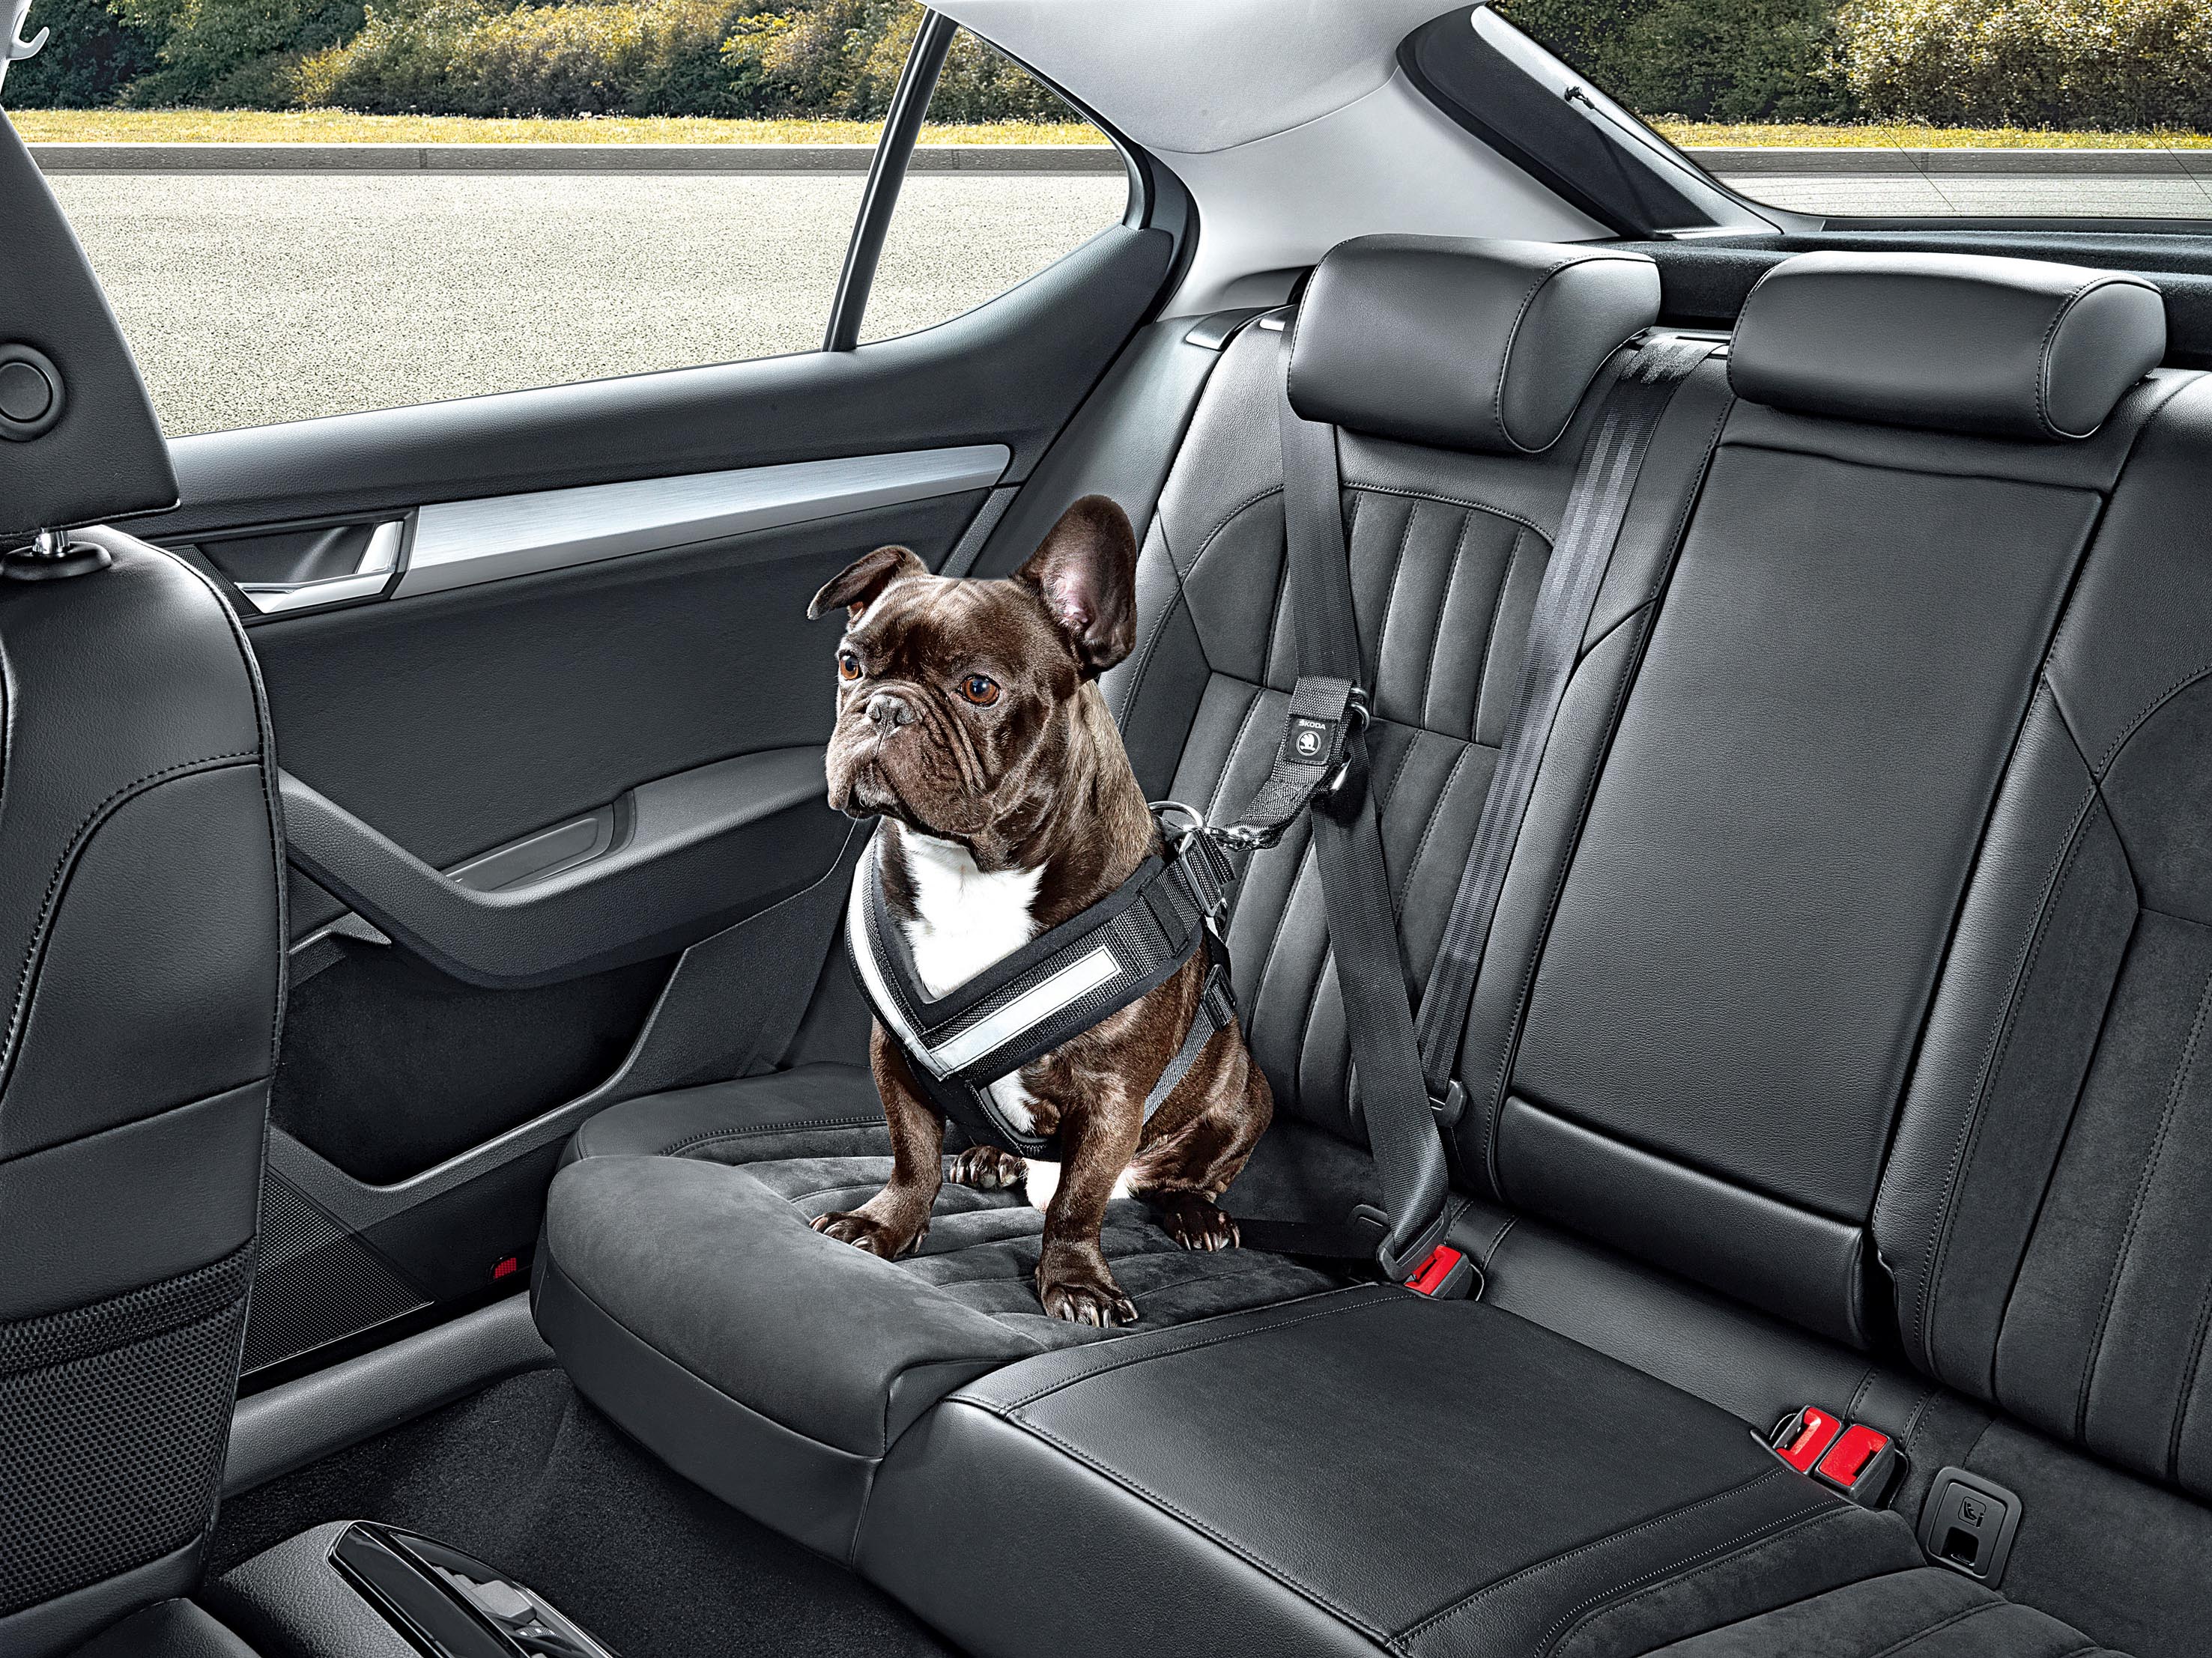 Wild thing: keeping your pet safe when travelling by car